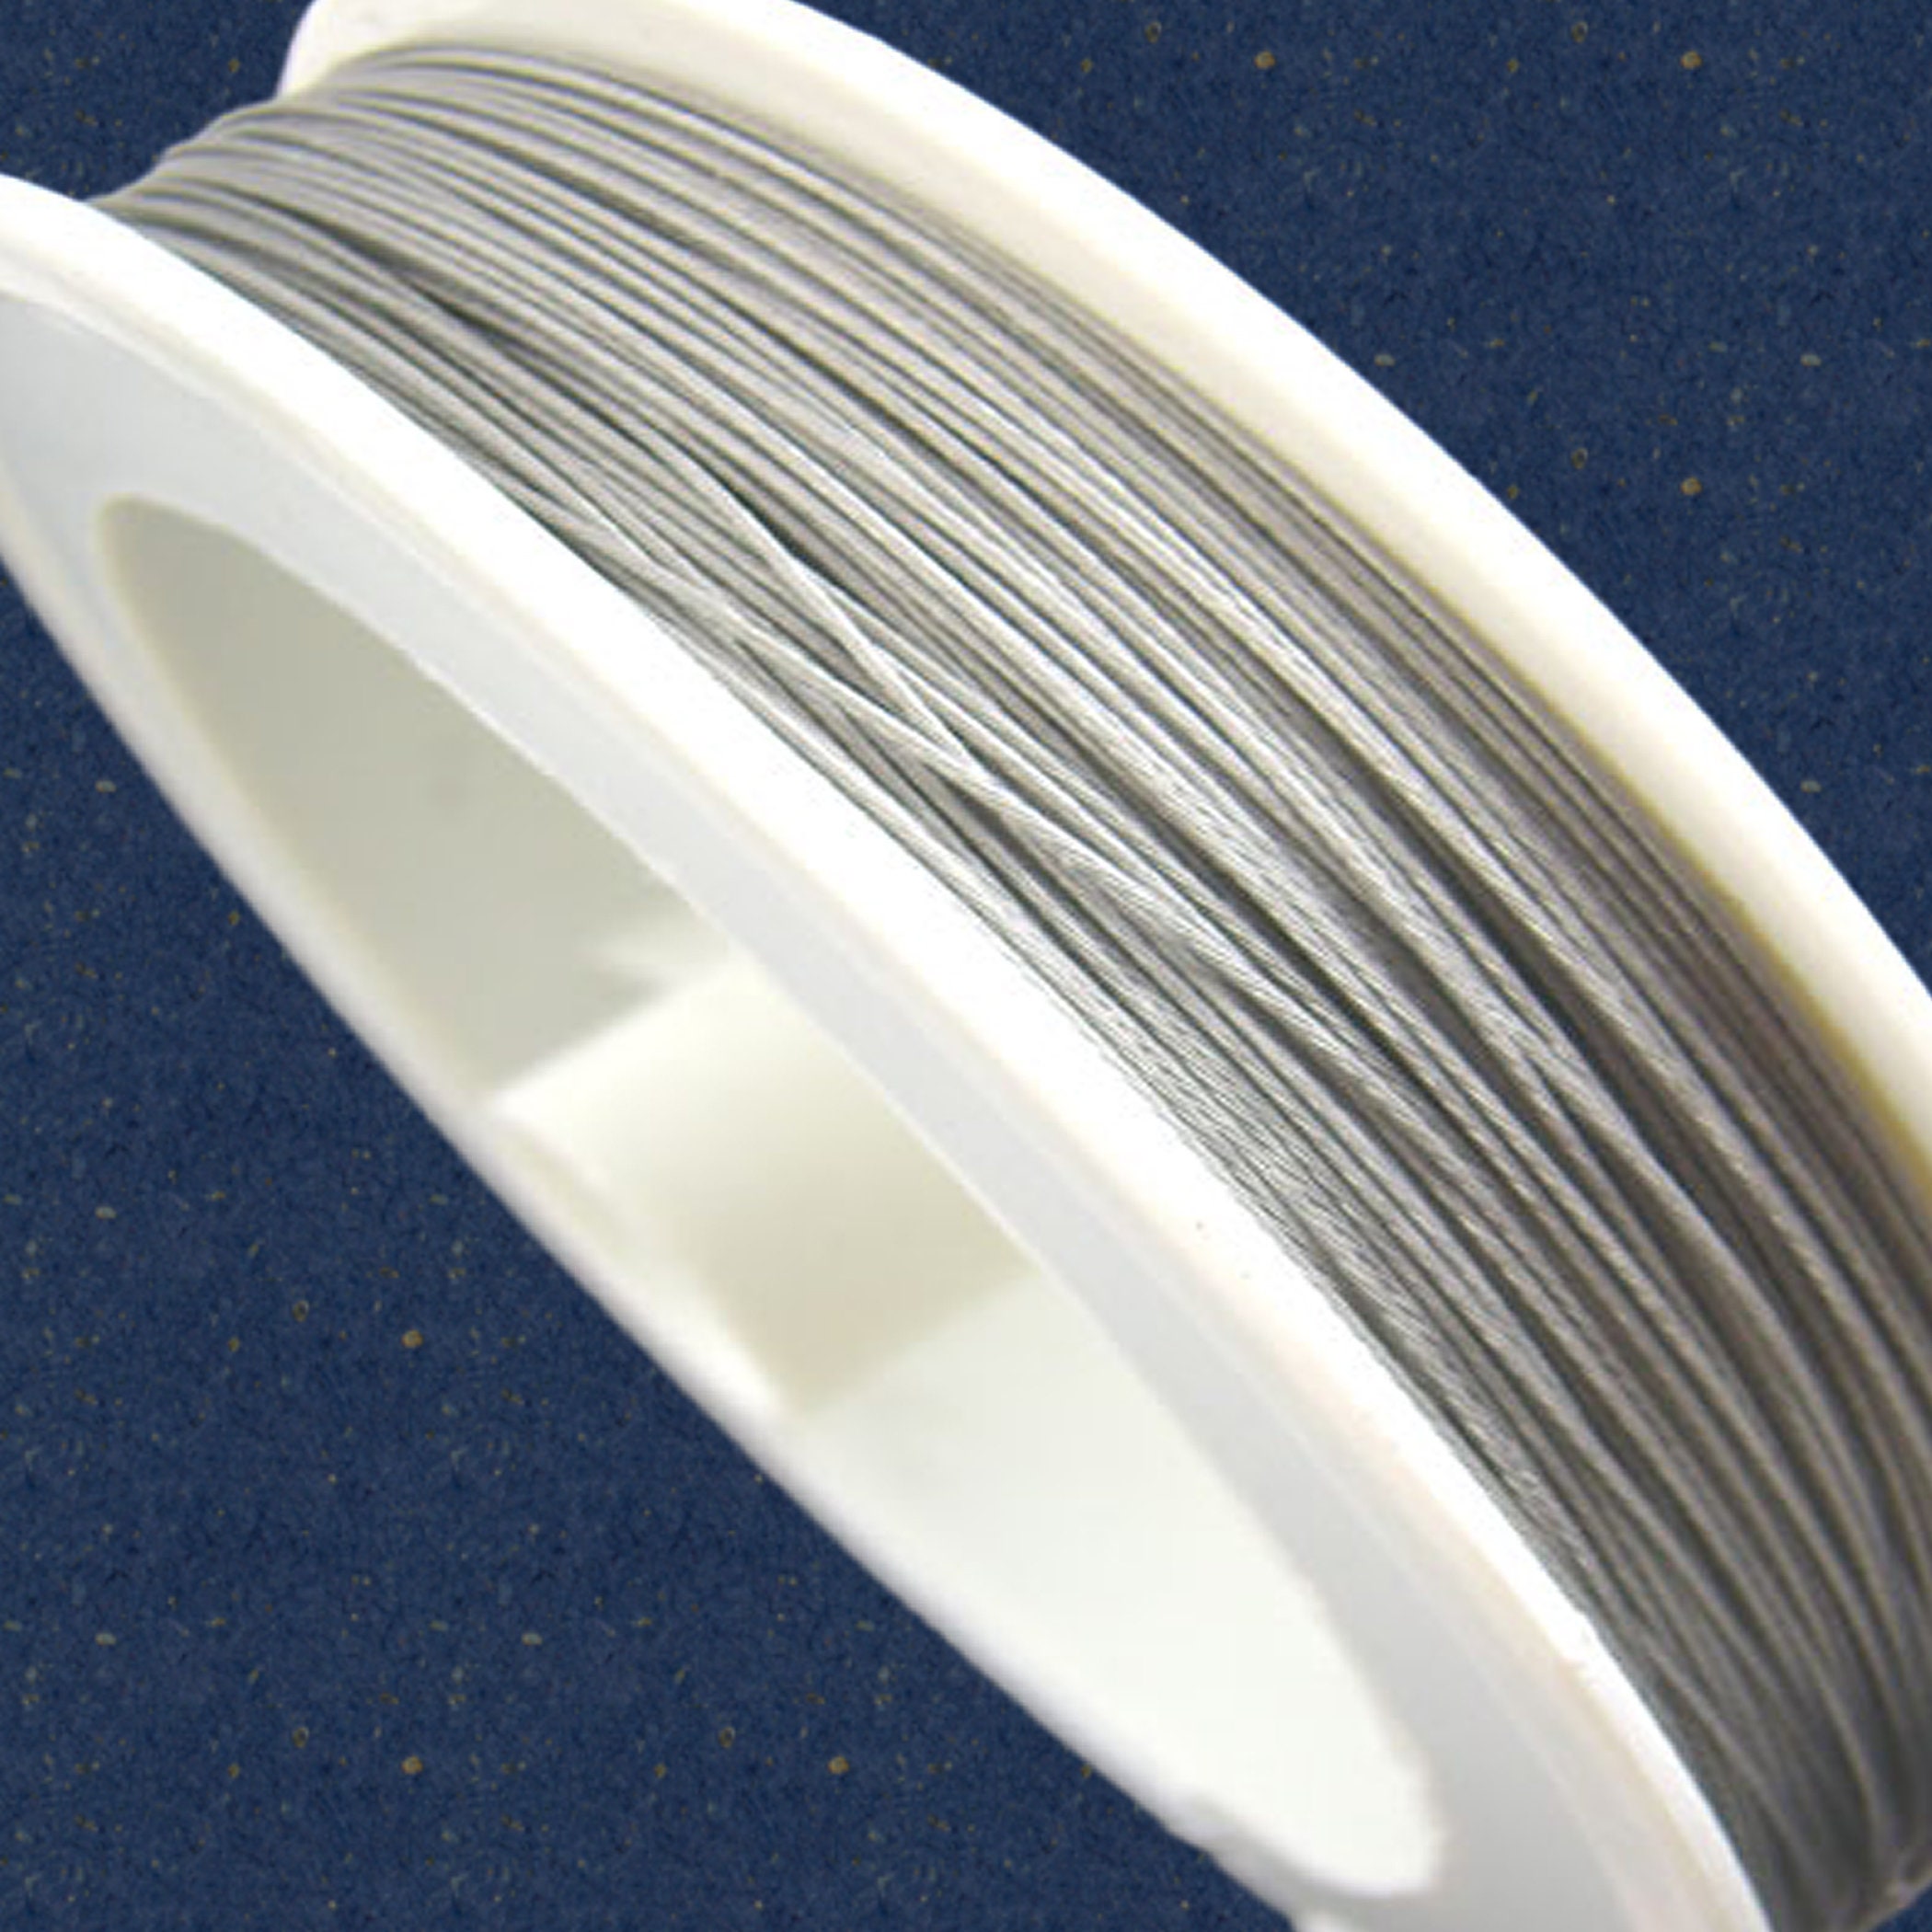 Approx. 10-Meter (32') Spool of 0.45mm 7-Strand Tiger Tail Nylon